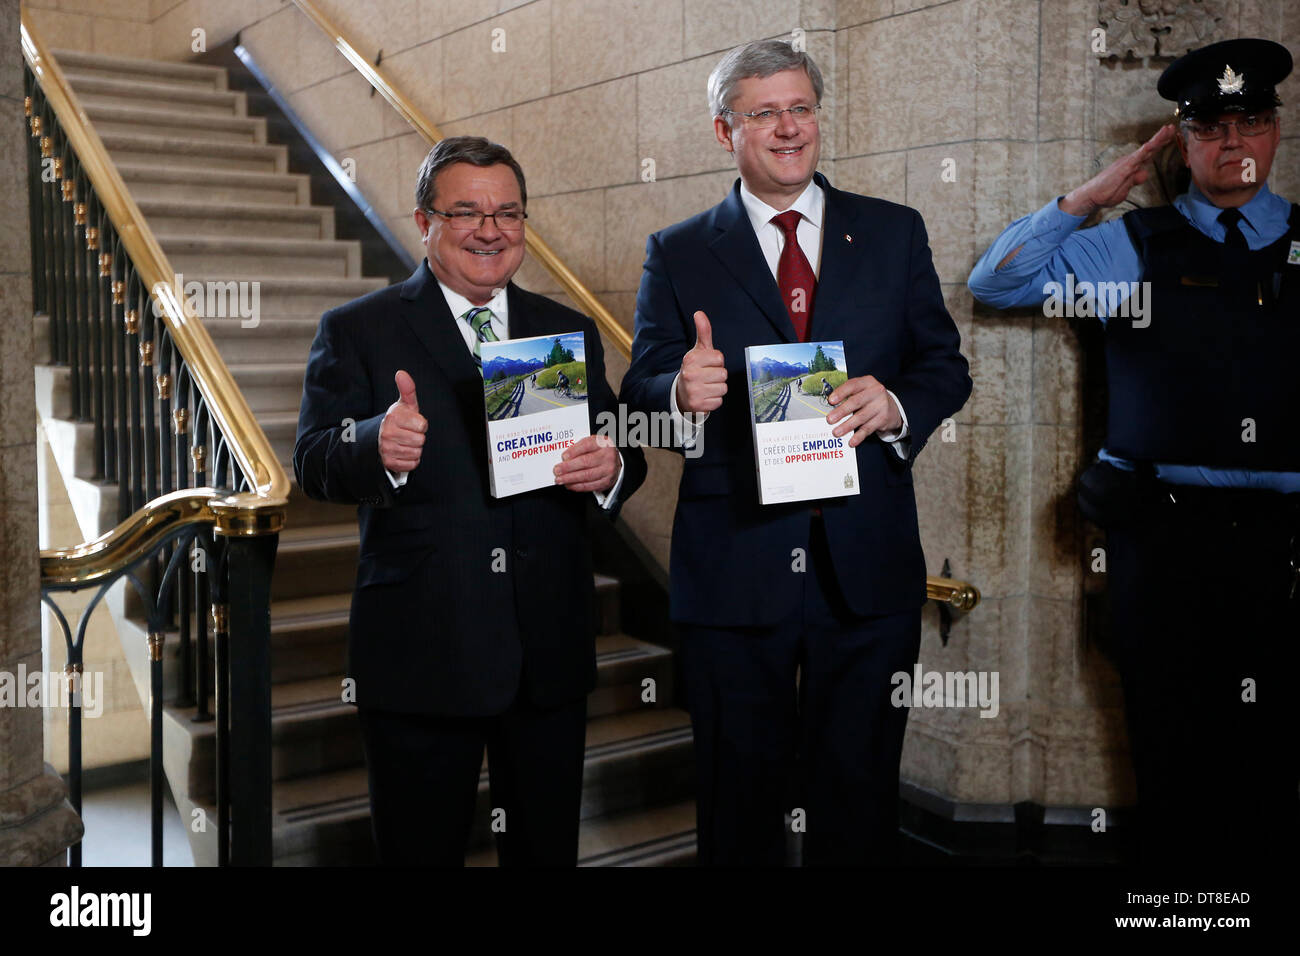 Ottawa, Canada. 11th Feb, 2014. Canada's Prime Minister Stephen Harper (C) and Finance Minister Jim Flaherty (L) announce the new federal budget at Parliament Hill in Ottawa, Canada, Feb. 11, 2014. Jim Flaherty on Tuesday unveiled a federal budget projecting a surplus in 2015. © David Kawai/Xinhua/Alamy Live News Stock Photo